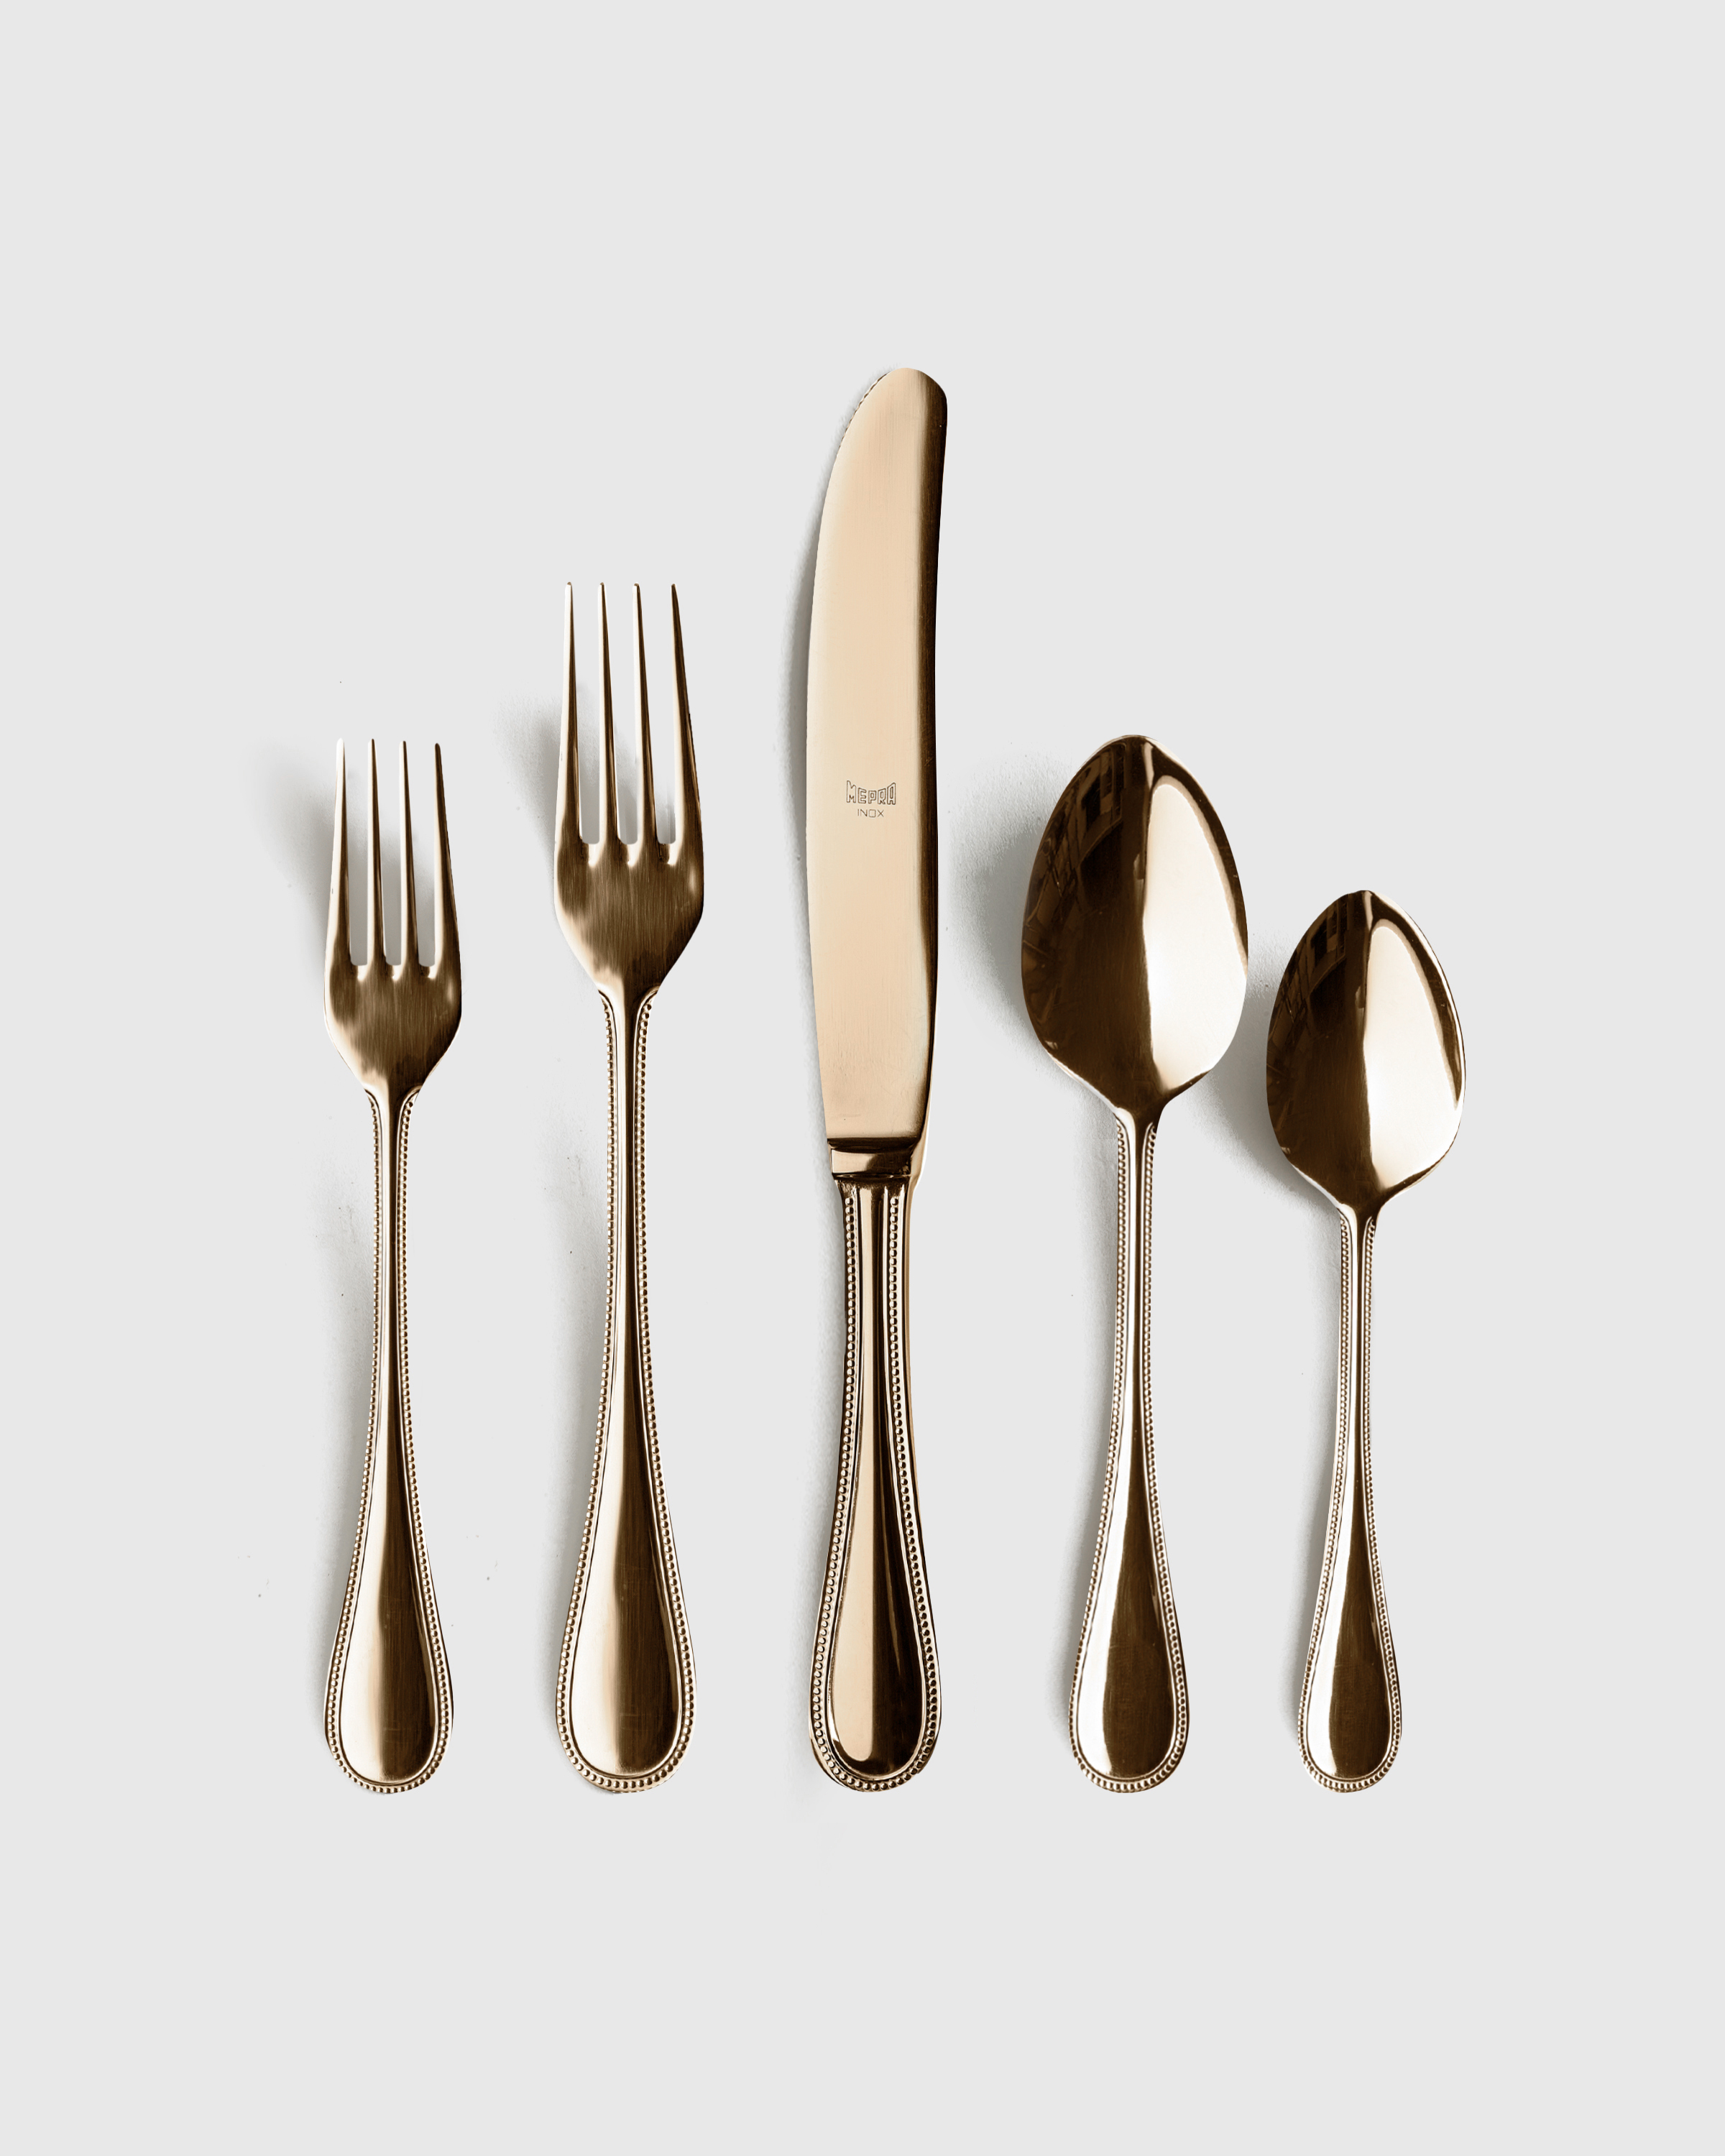 Quince Perla Flatware 20-pc Set In Polished Champagne